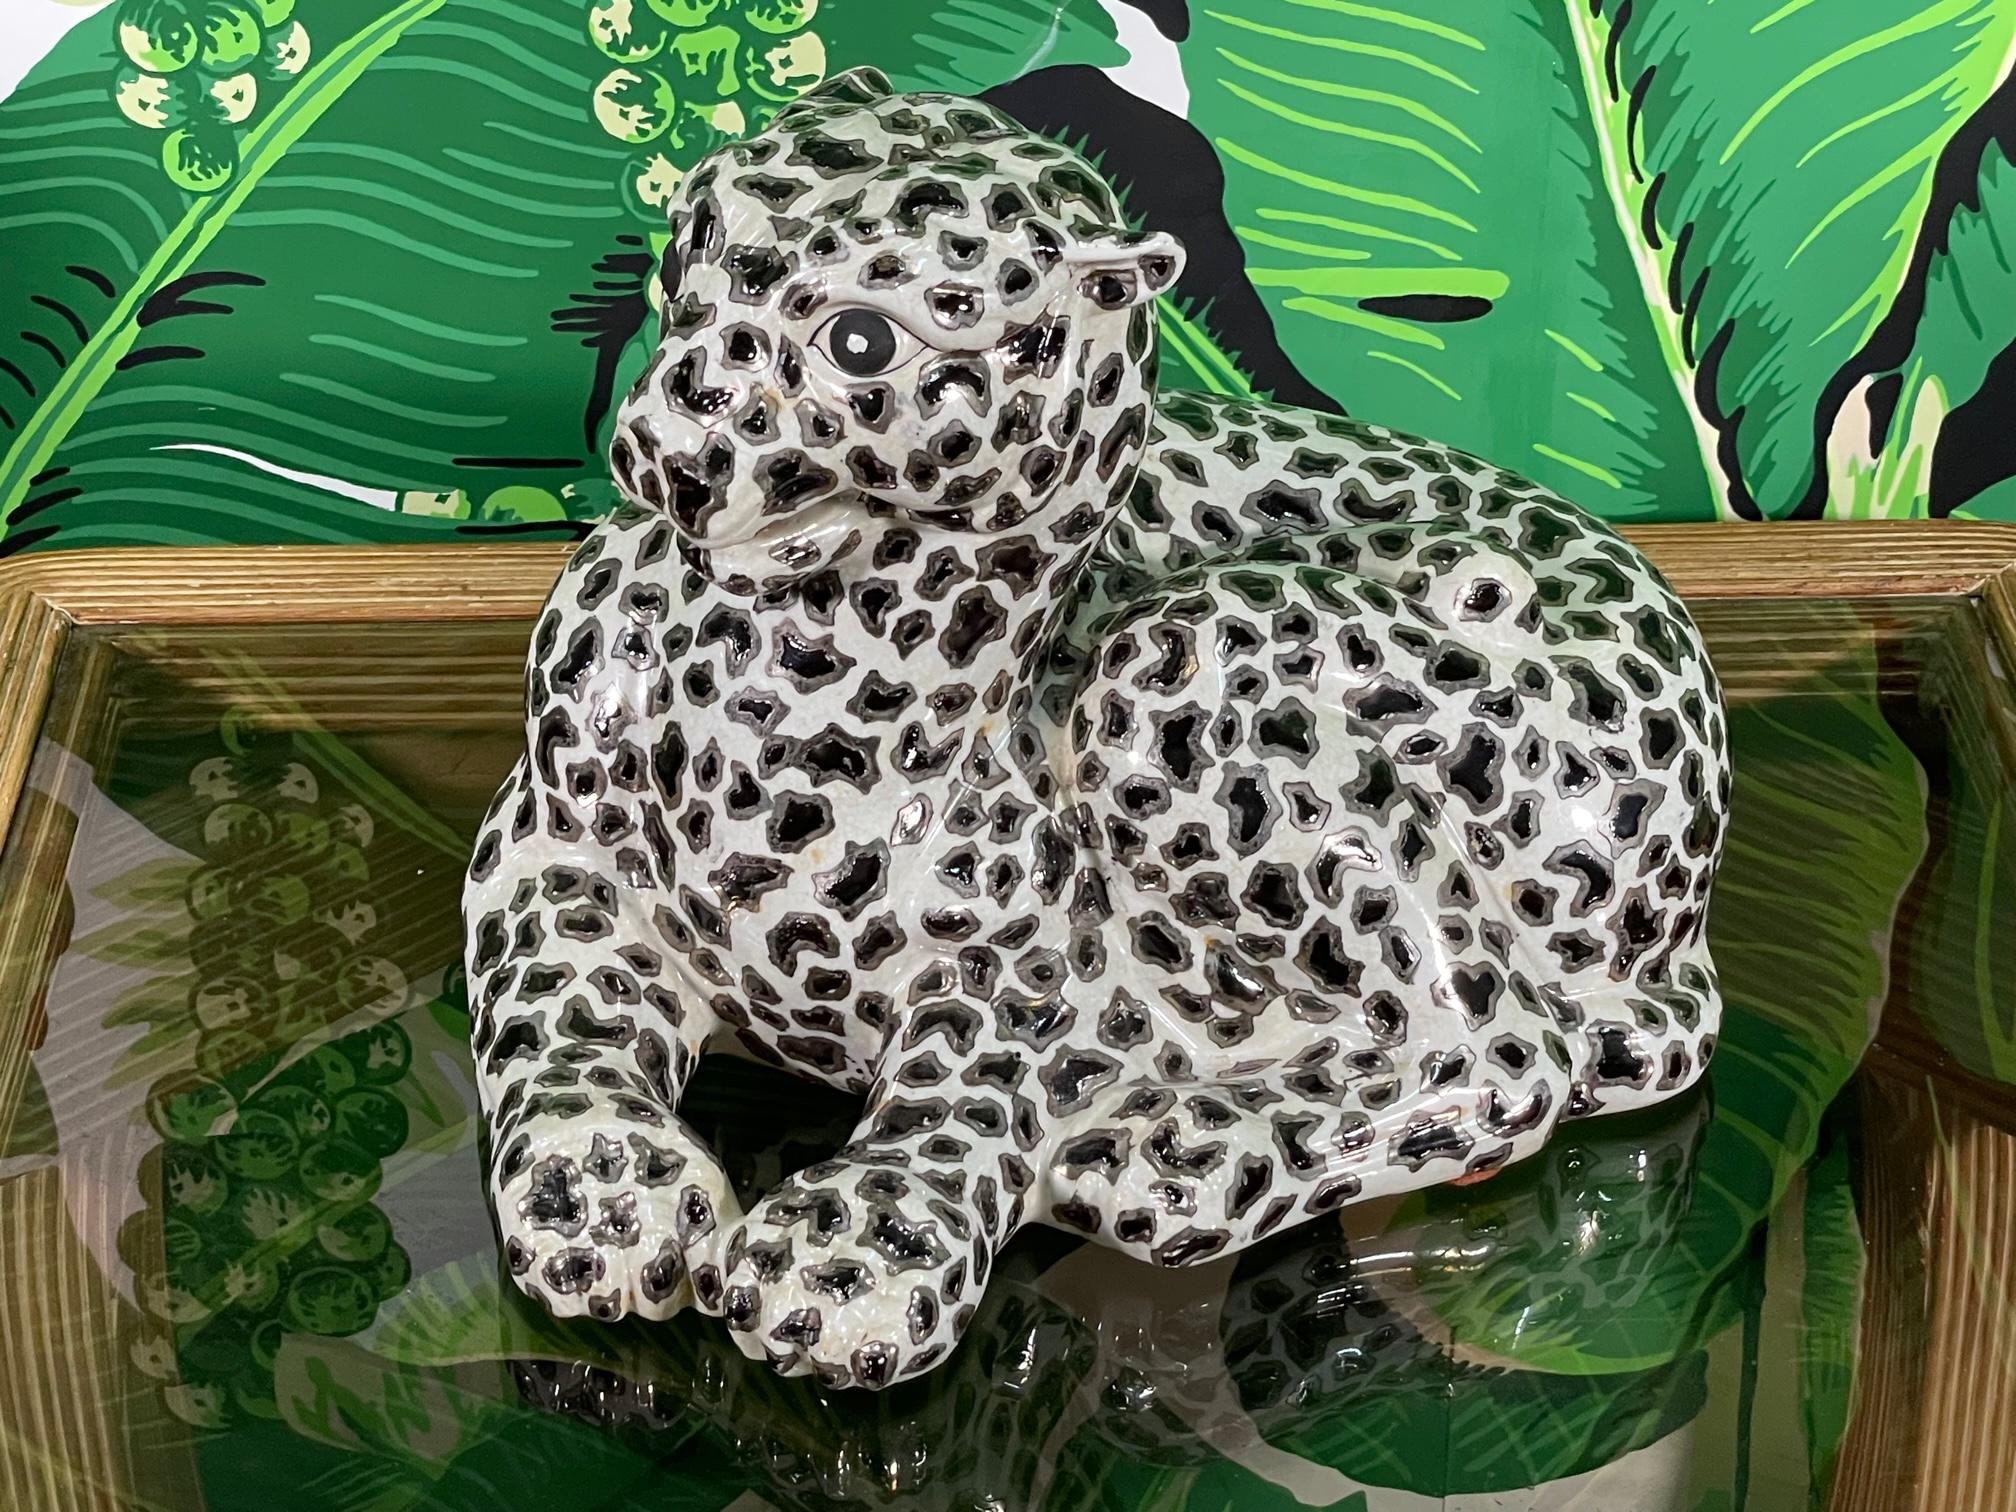 Pocelain leopard figurine features silver leaf accents and a glossy glazed finish. Marked 